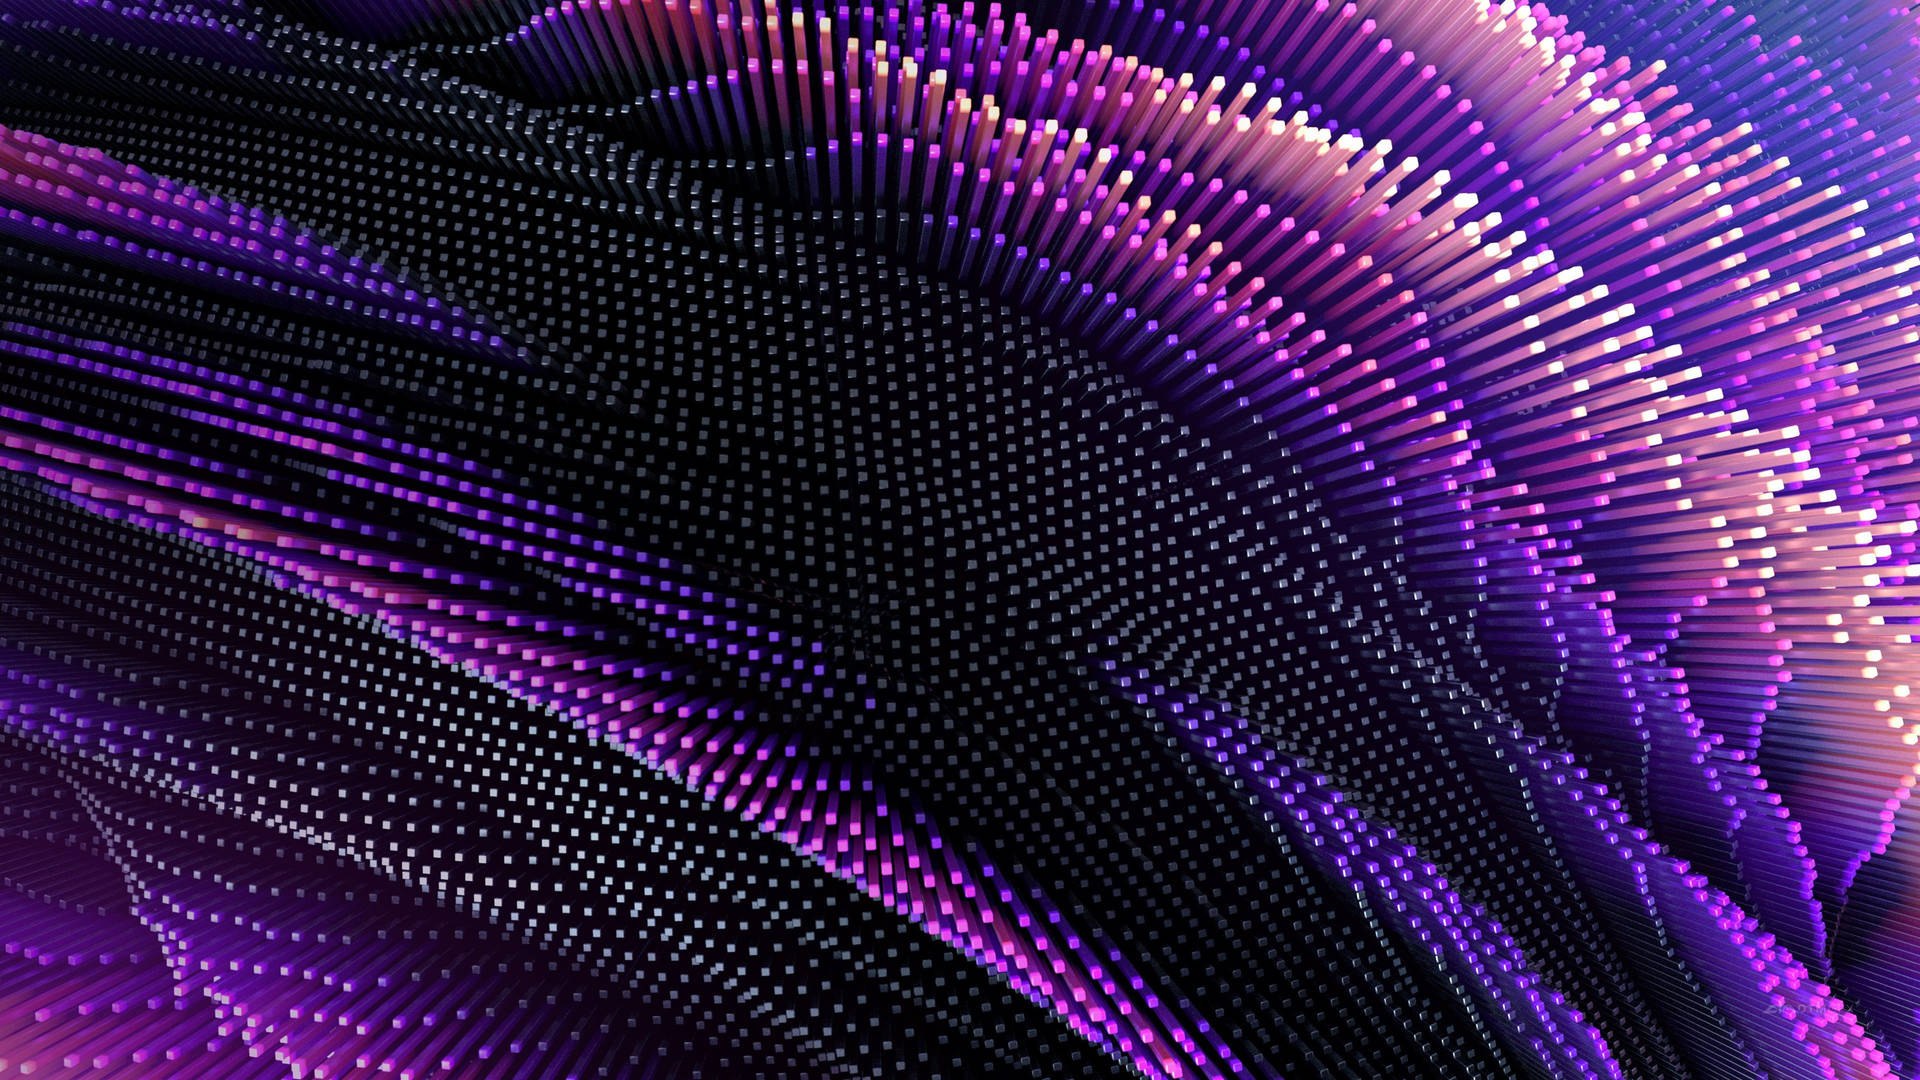 Bright and bold, Neon Purple offers a vivid hue that stands out. Wallpaper